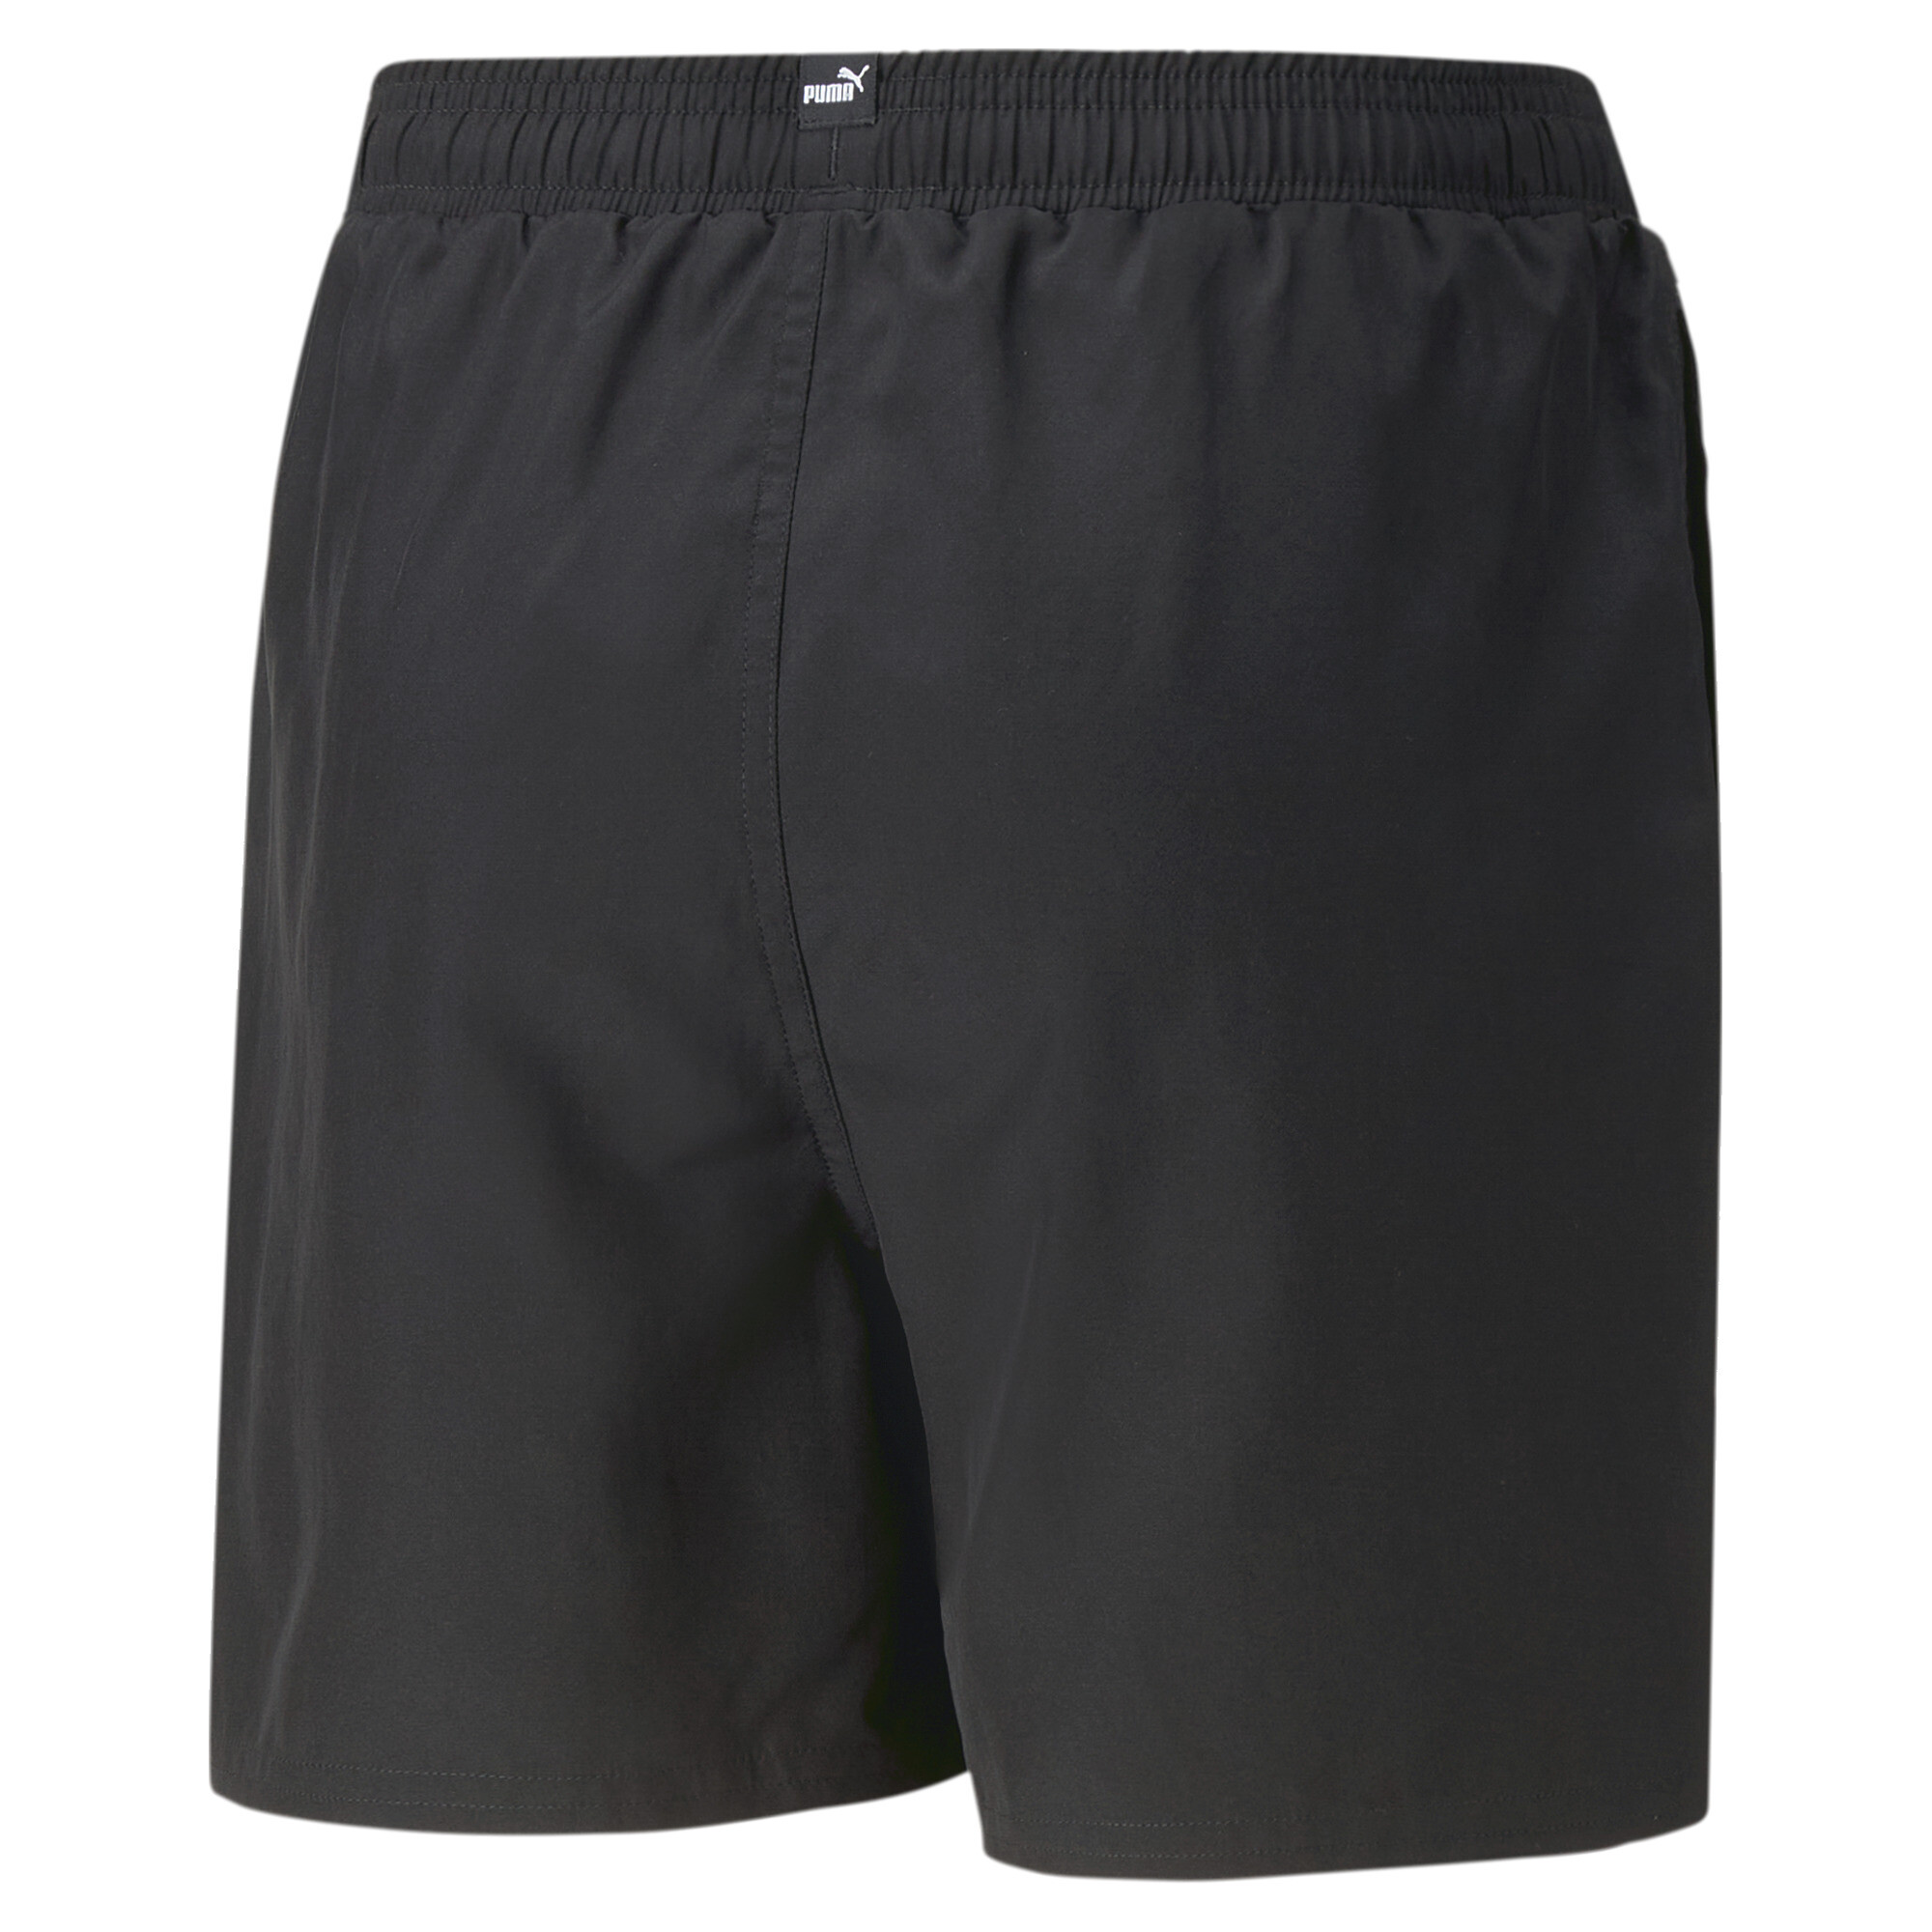 PUMA Essentials+ Logolab Woven Shorts In Black, Size 4-5 Youth